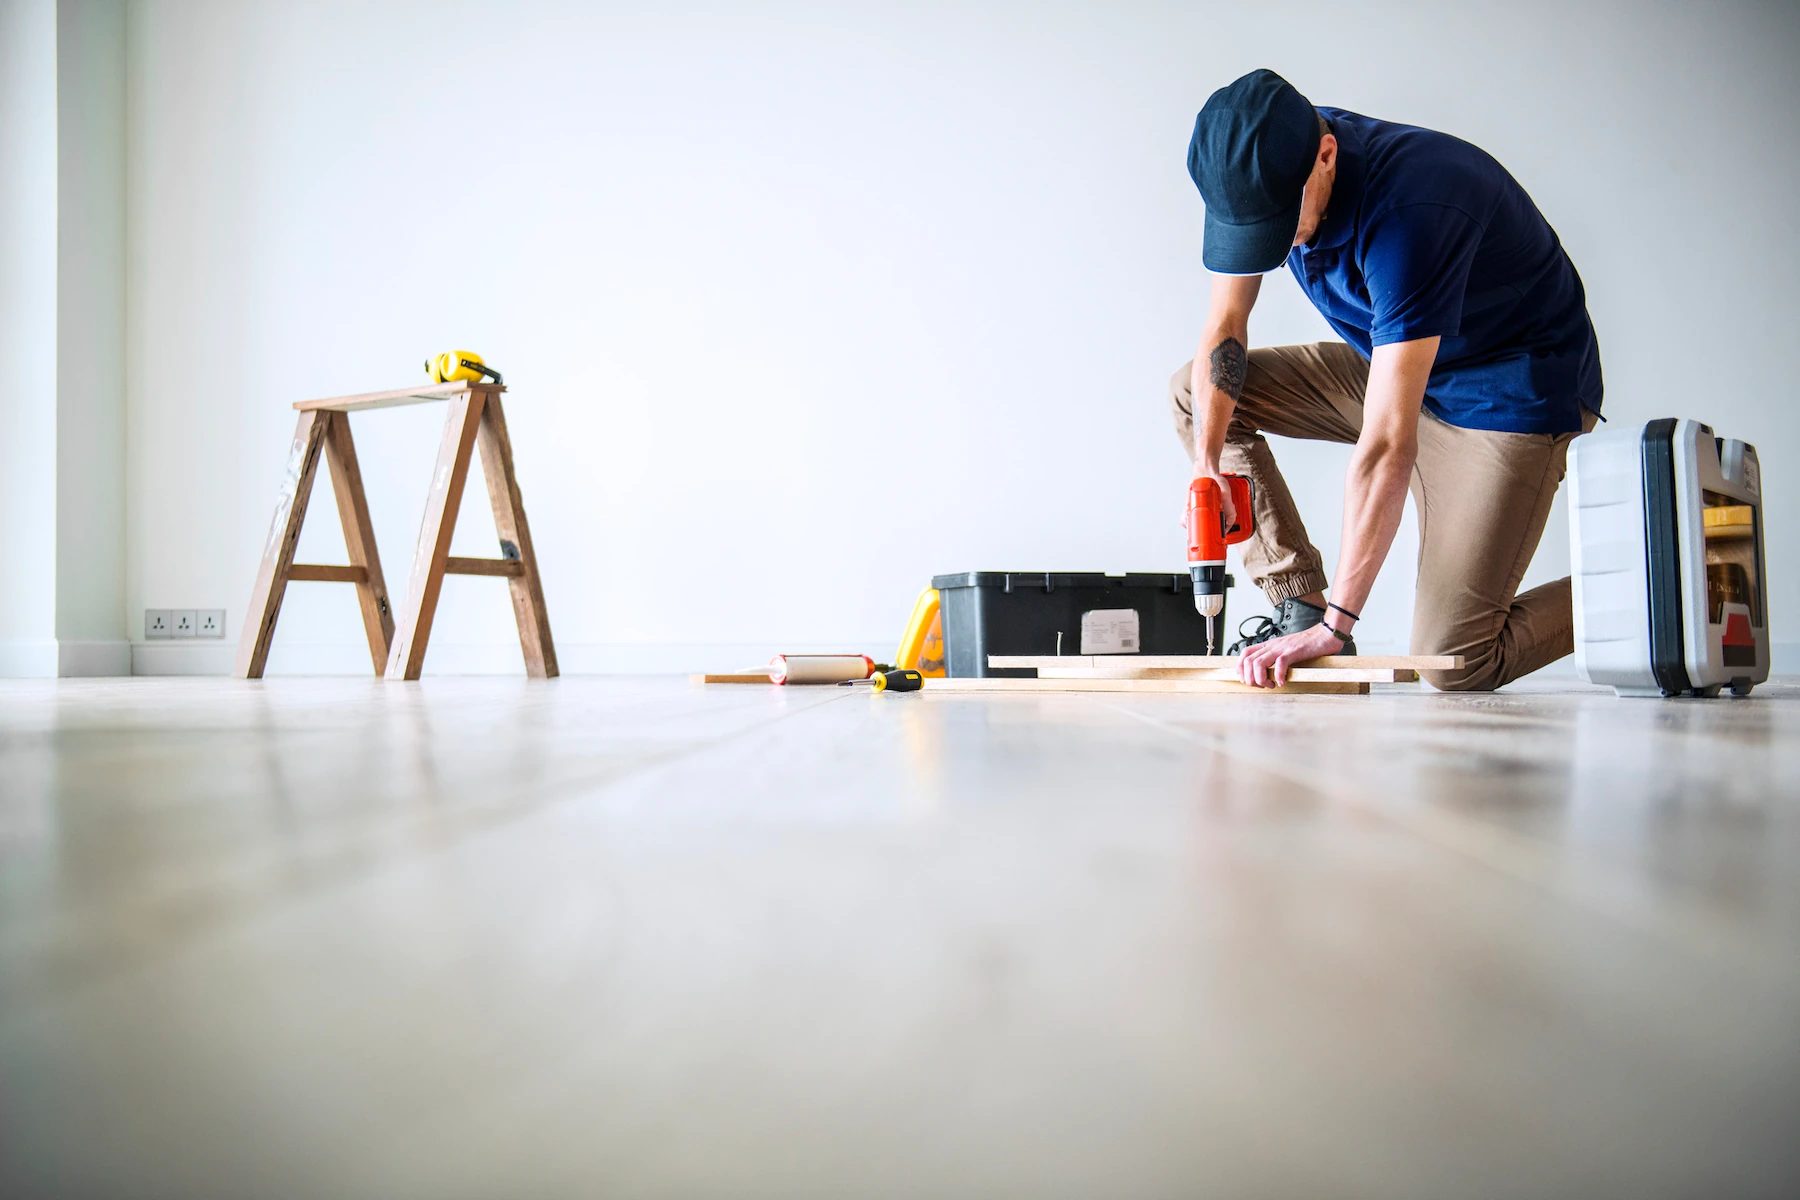 A professional installer working on a floor, using a power drill to secure wooden planks. The installer is dressed in a blue shirt and cap, and is kneeling on a light-colored hardwood floor. Nearby, a toolbox and various tools are visible, indicating an active flooring installation project. A wooden step ladder stands in the background, adding to the scene of a well-organized and precise flooring job. This image captures the expertise and attention to detail in floor installation.